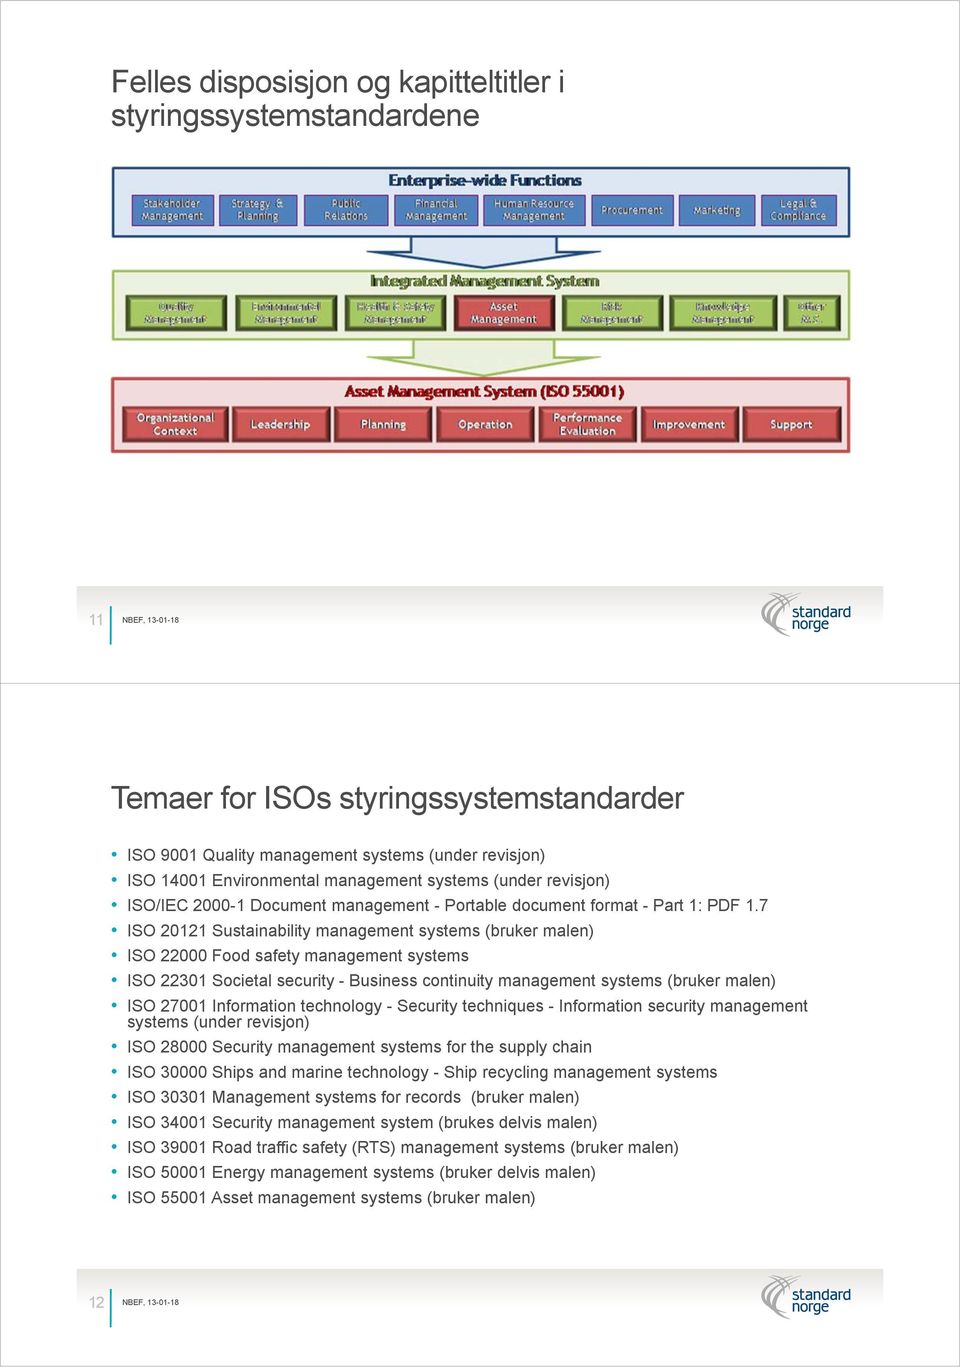 7 ISO 20121 Sustainability management systems (bruker malen) ISO 22000 Food safety management systems ISO 22301 Societal security - Business continuity management systems (bruker malen) ISO 27001